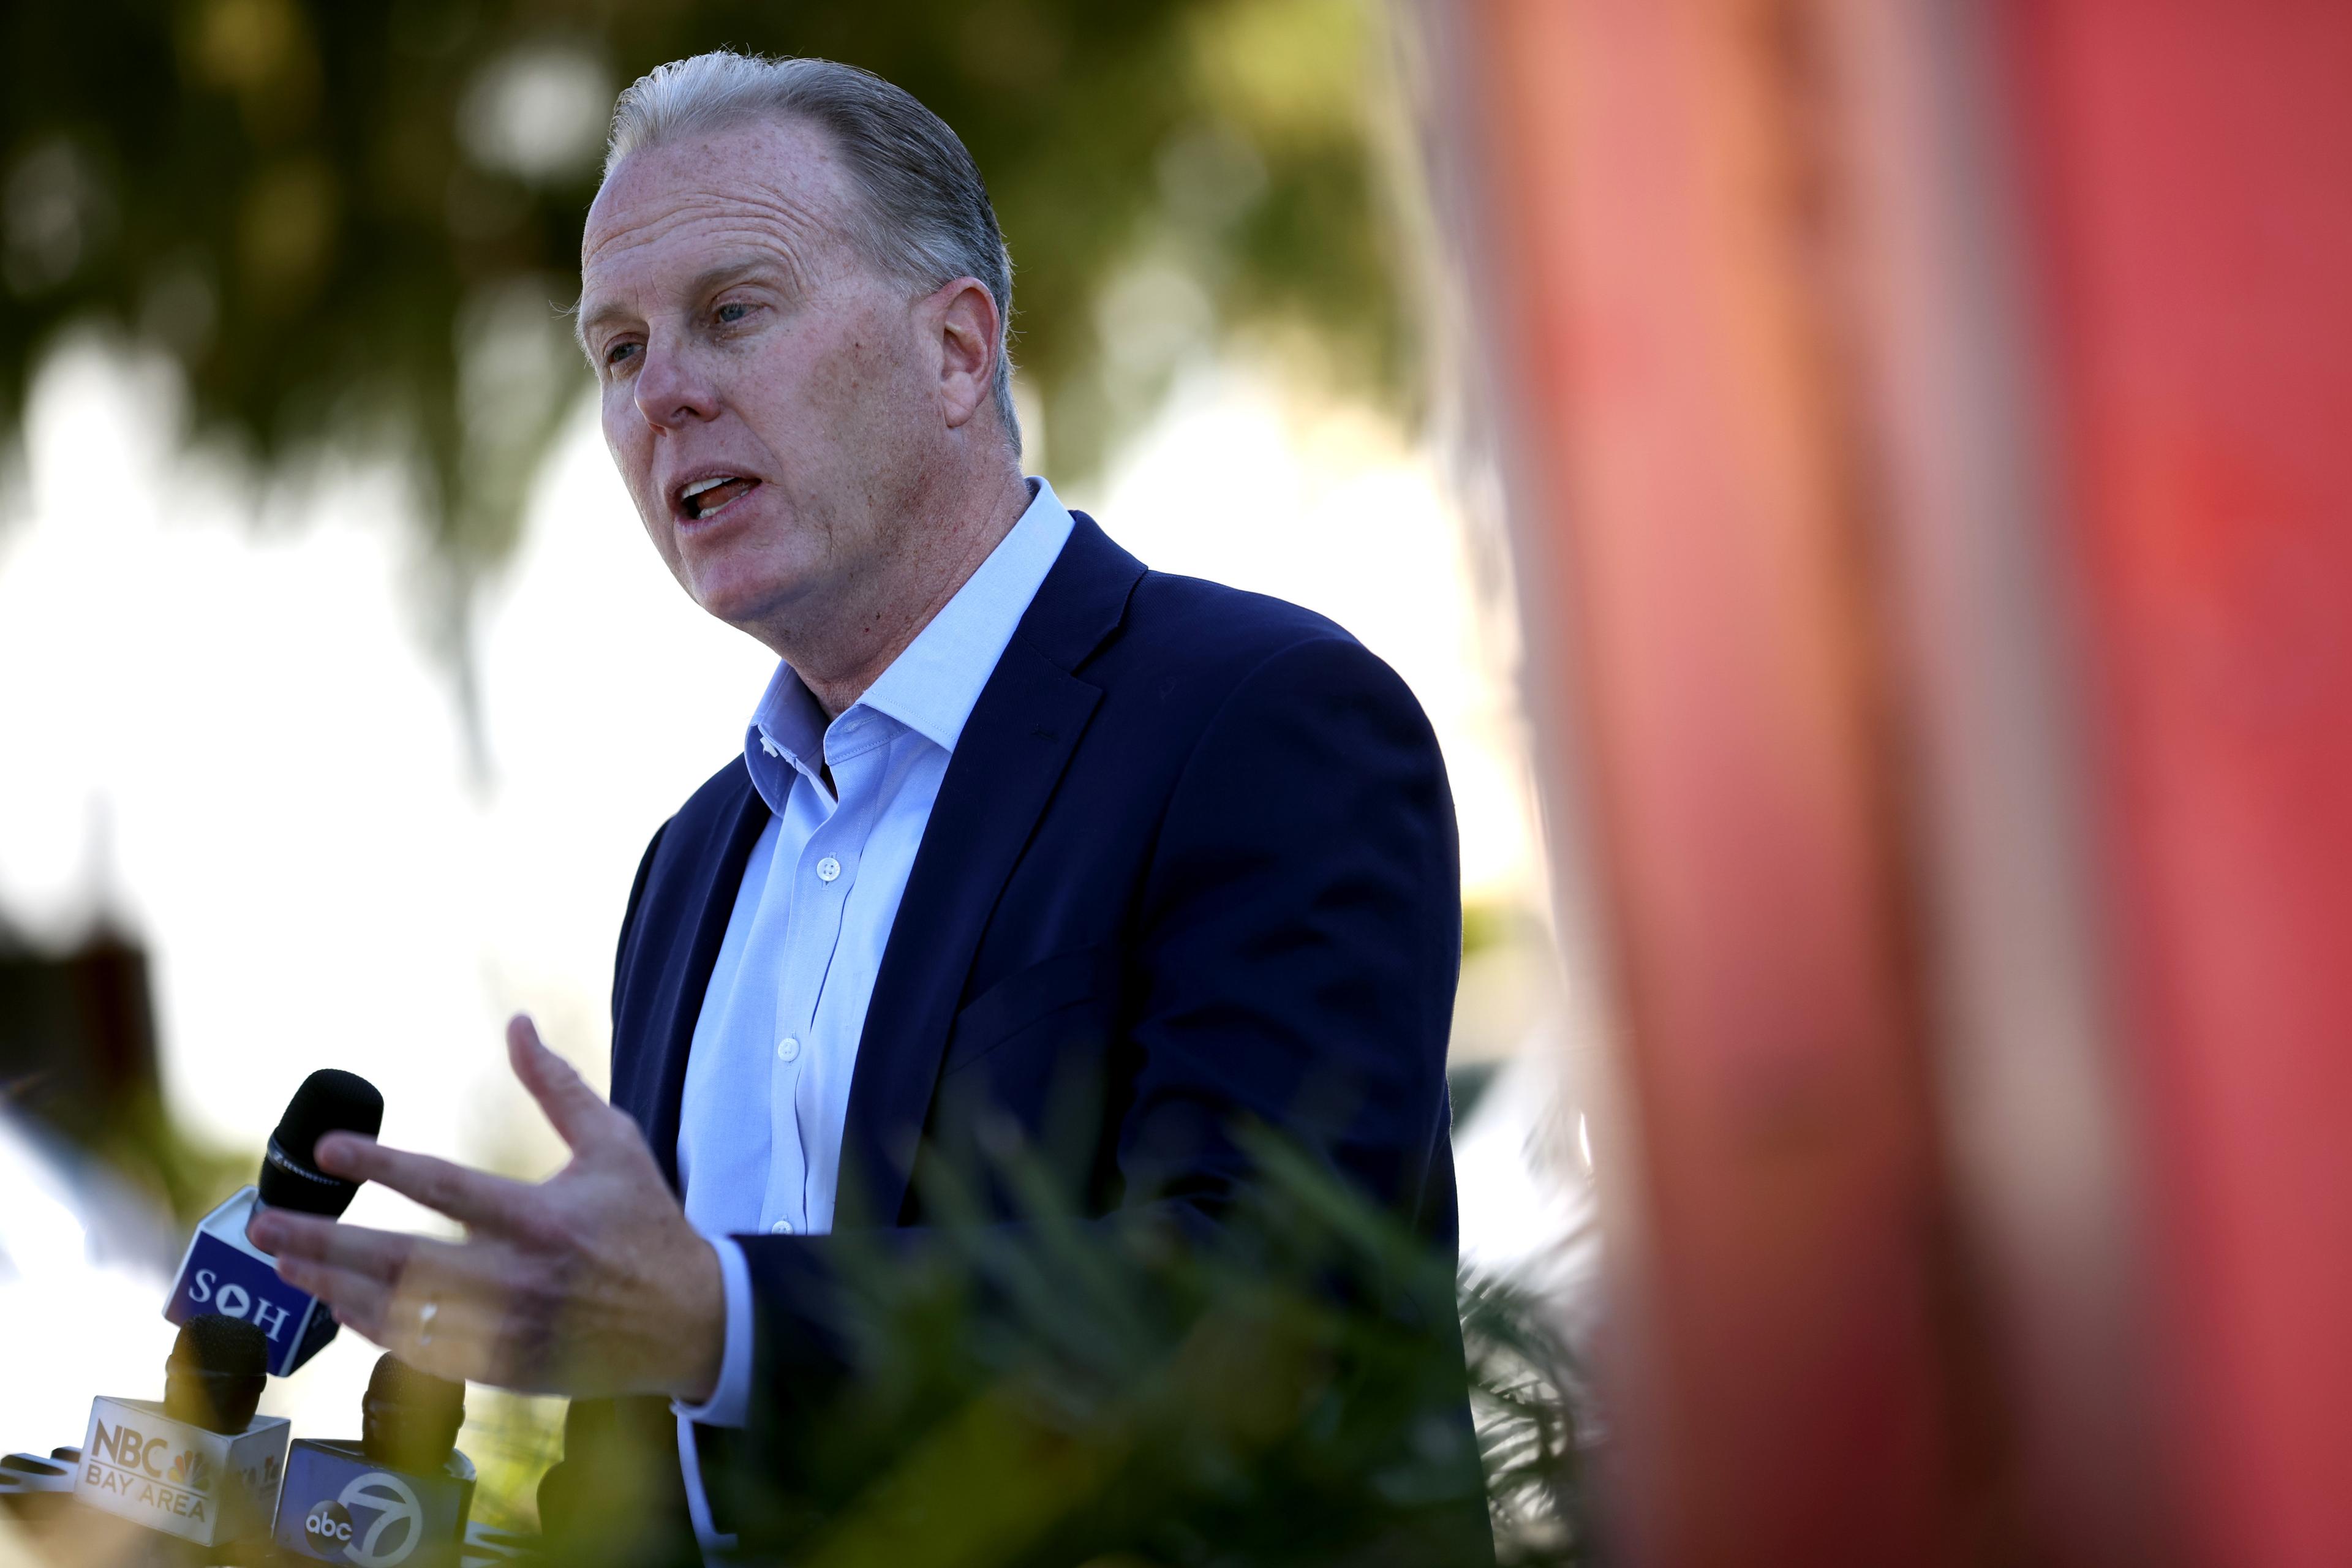 Former San Diego Mayor Kevin Faulconer to Run for County Board of Supervisors